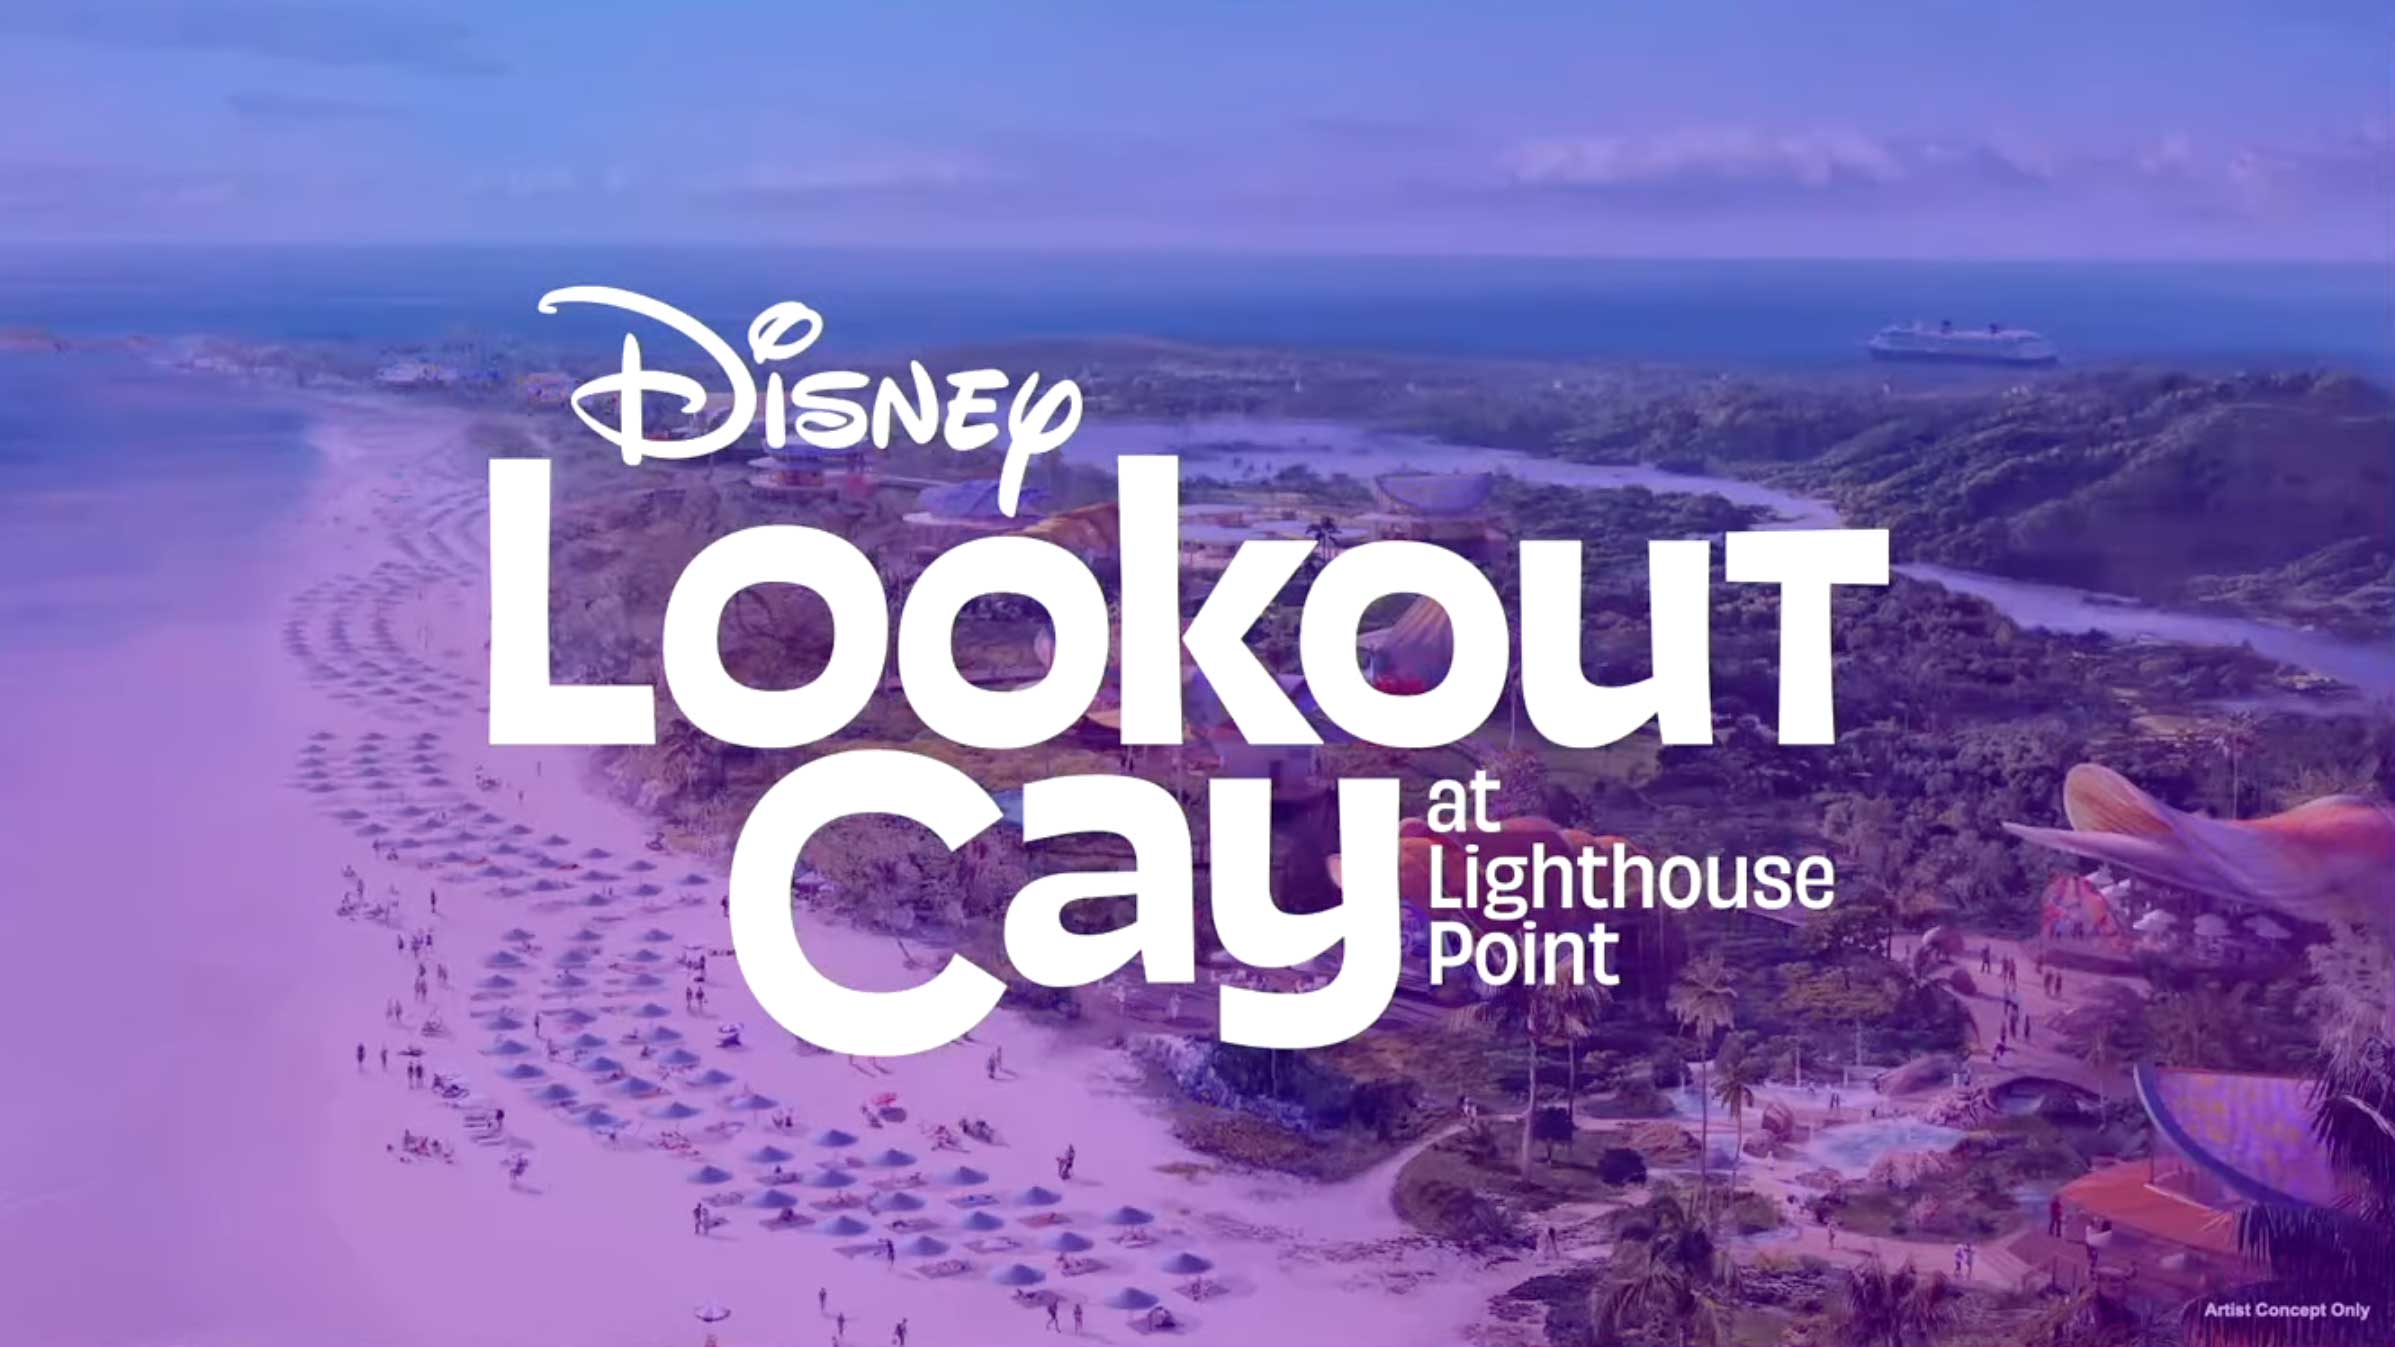 DCL Disney Lookout Cay At Lighthouse Point Logo